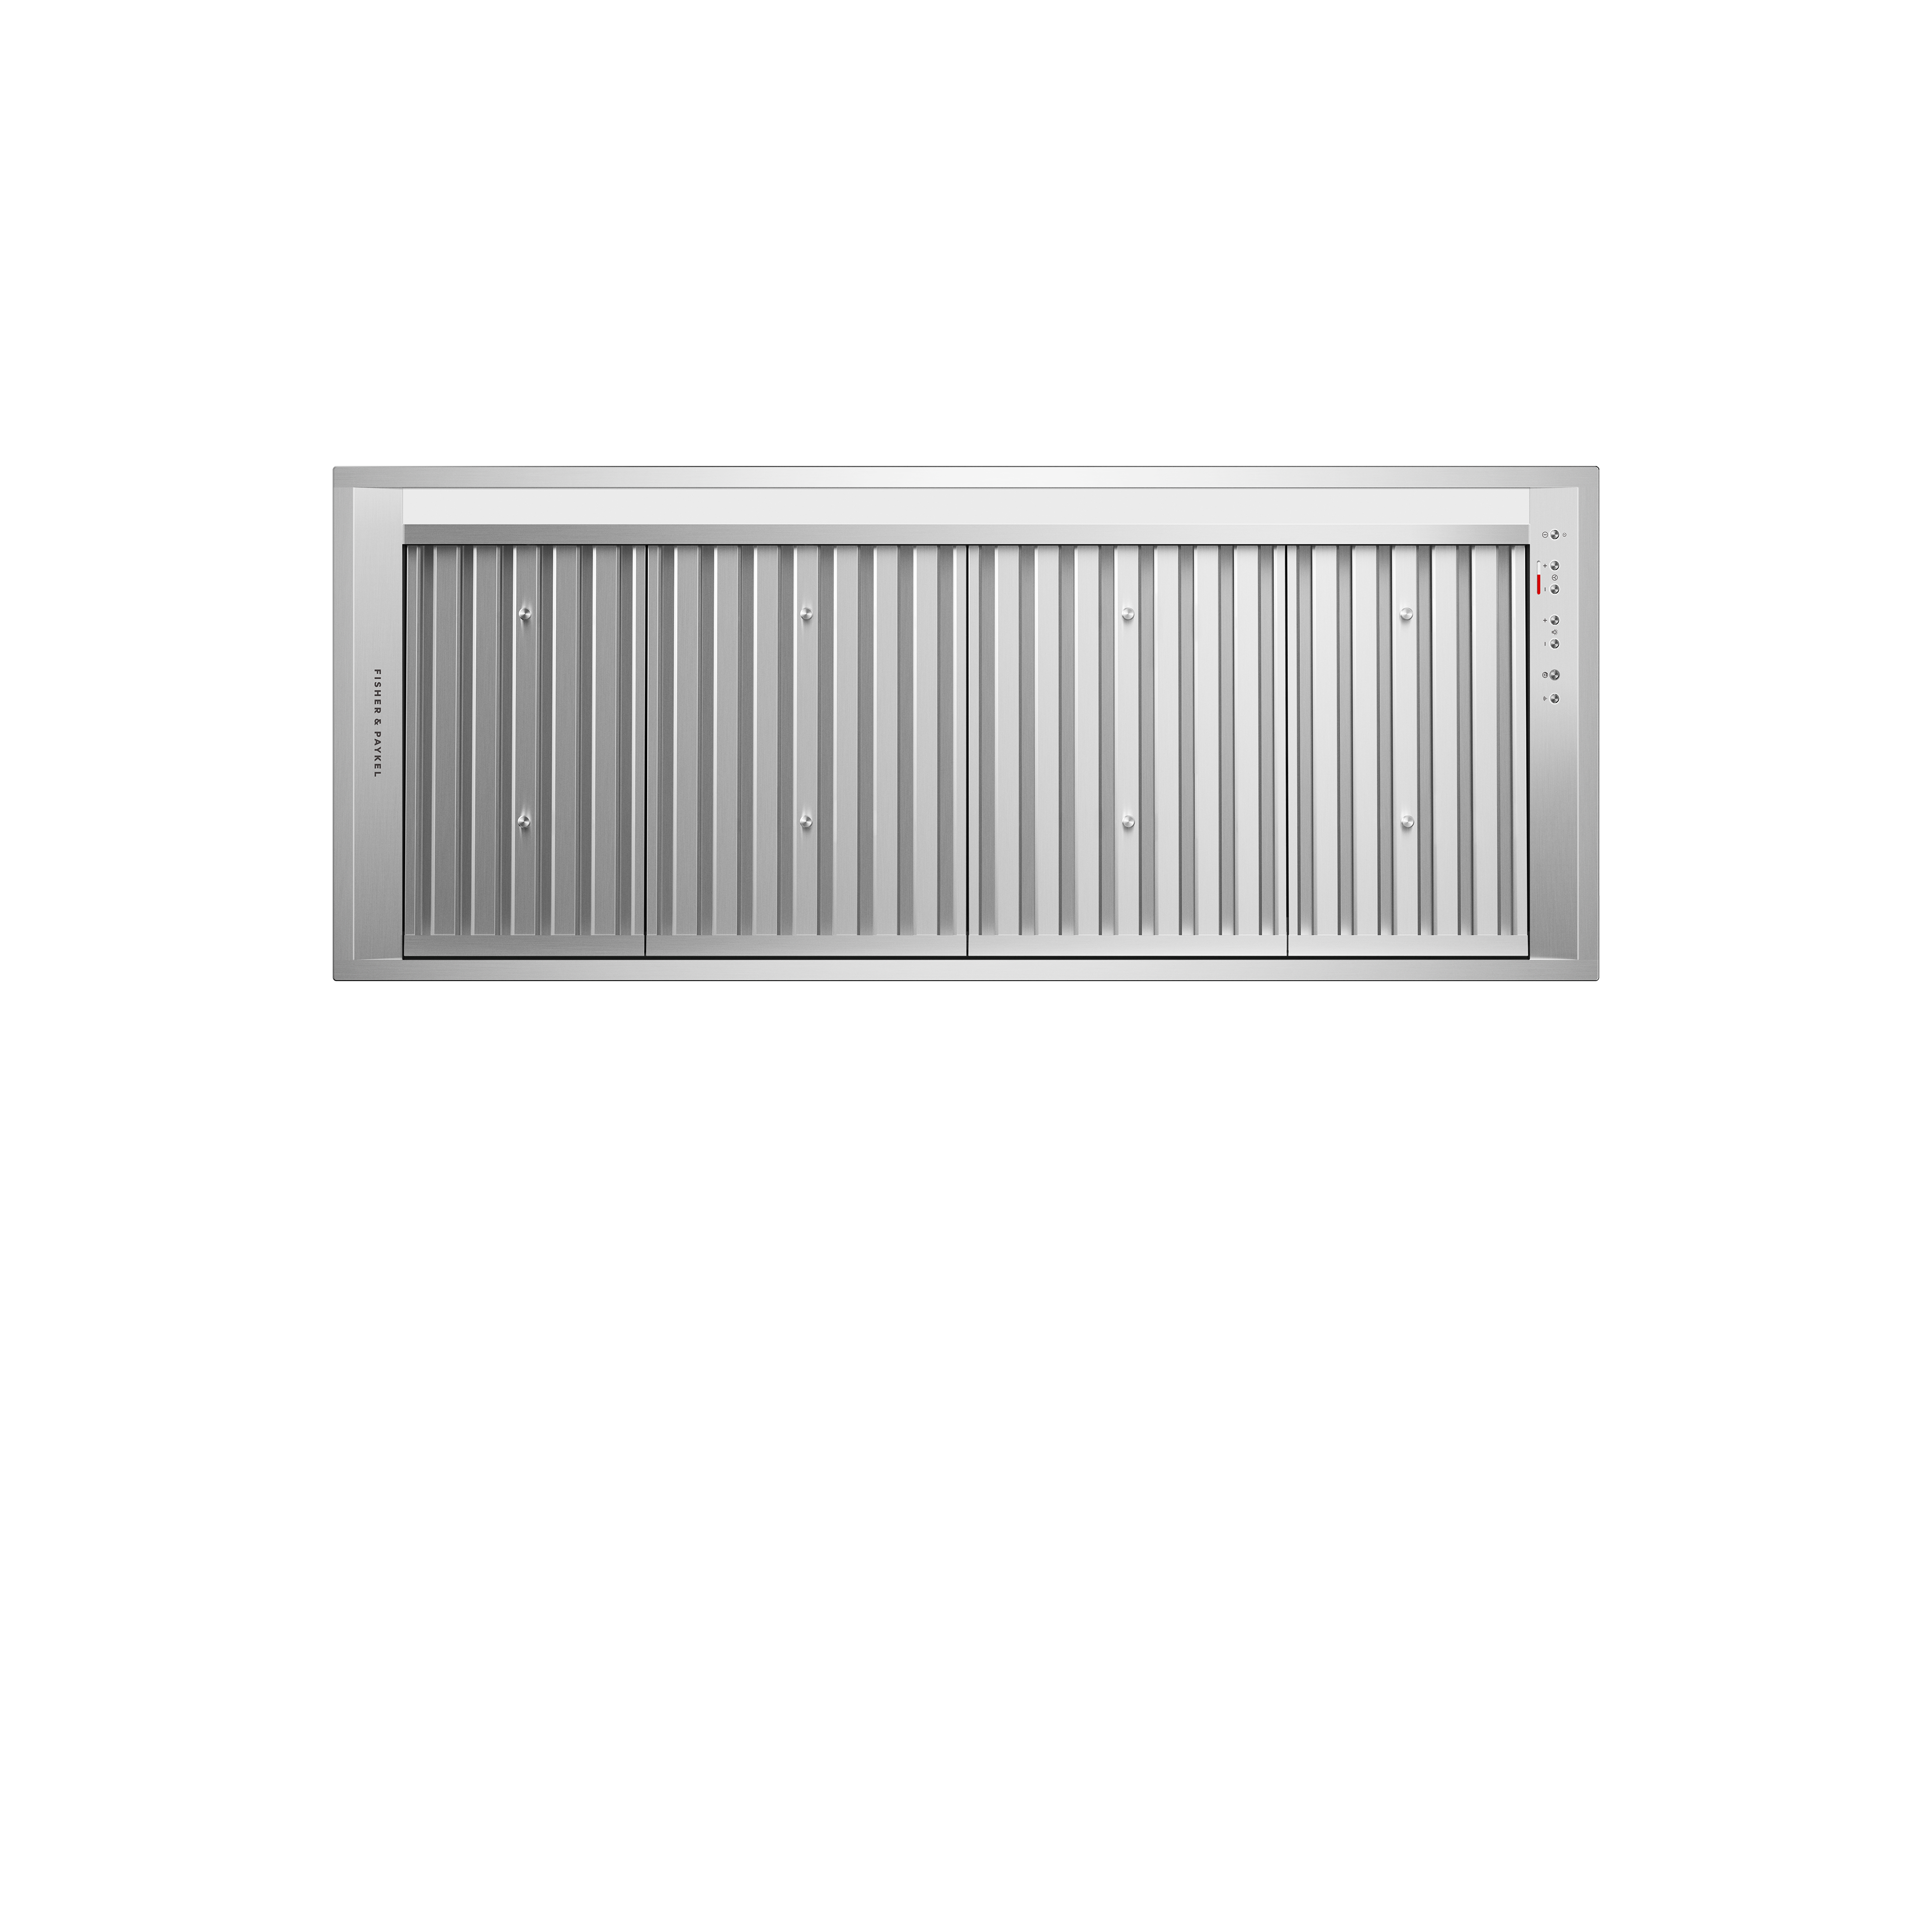 Fisher and Paykel Insert Range Hood, 48"